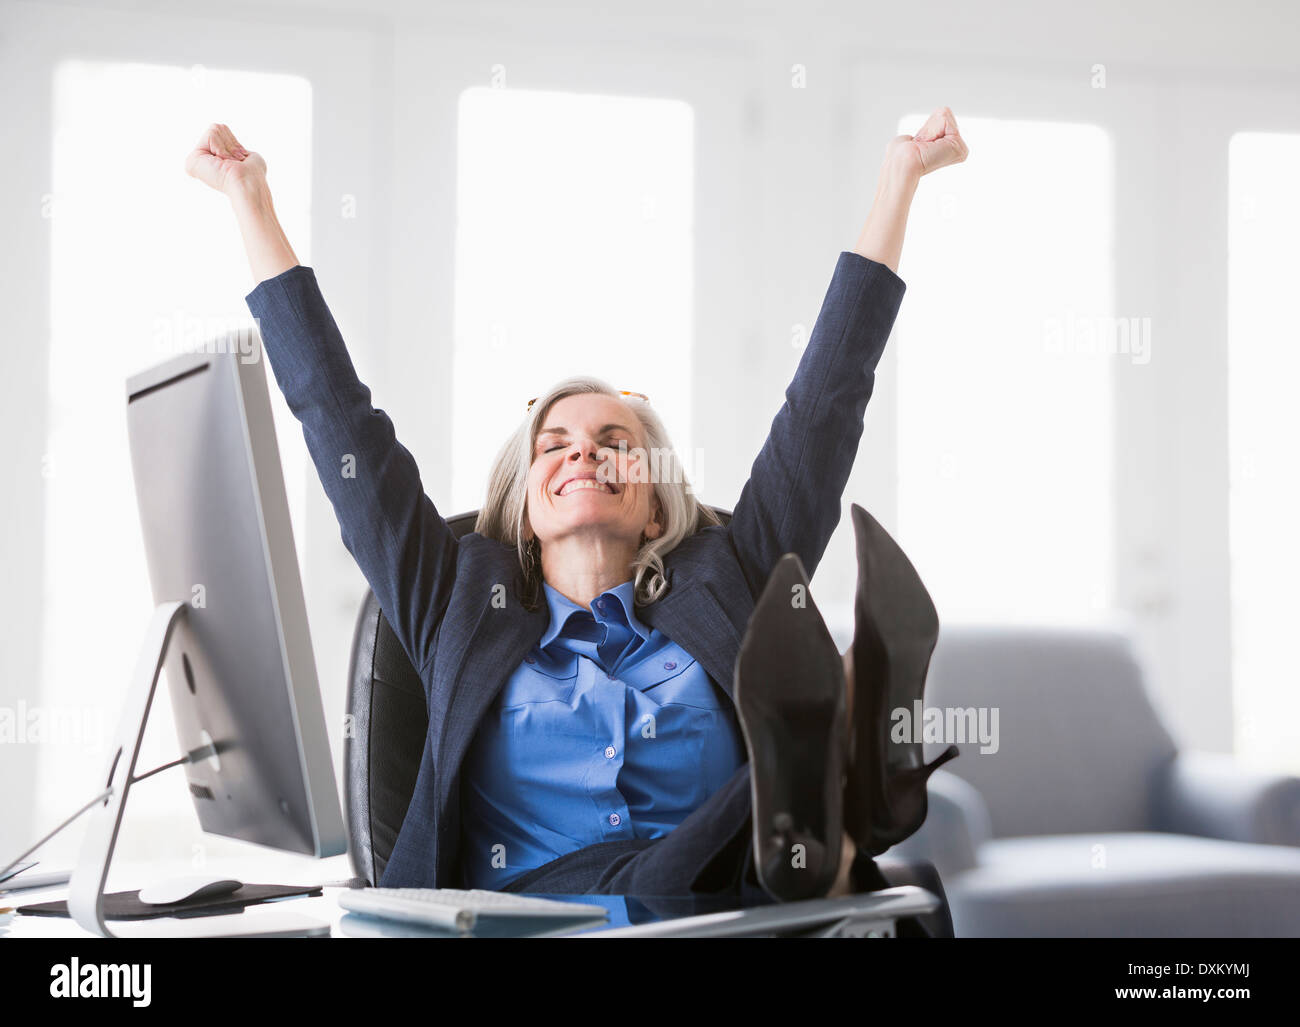 Happy Caucasian businesswoman with feet up on desk Stock Photo